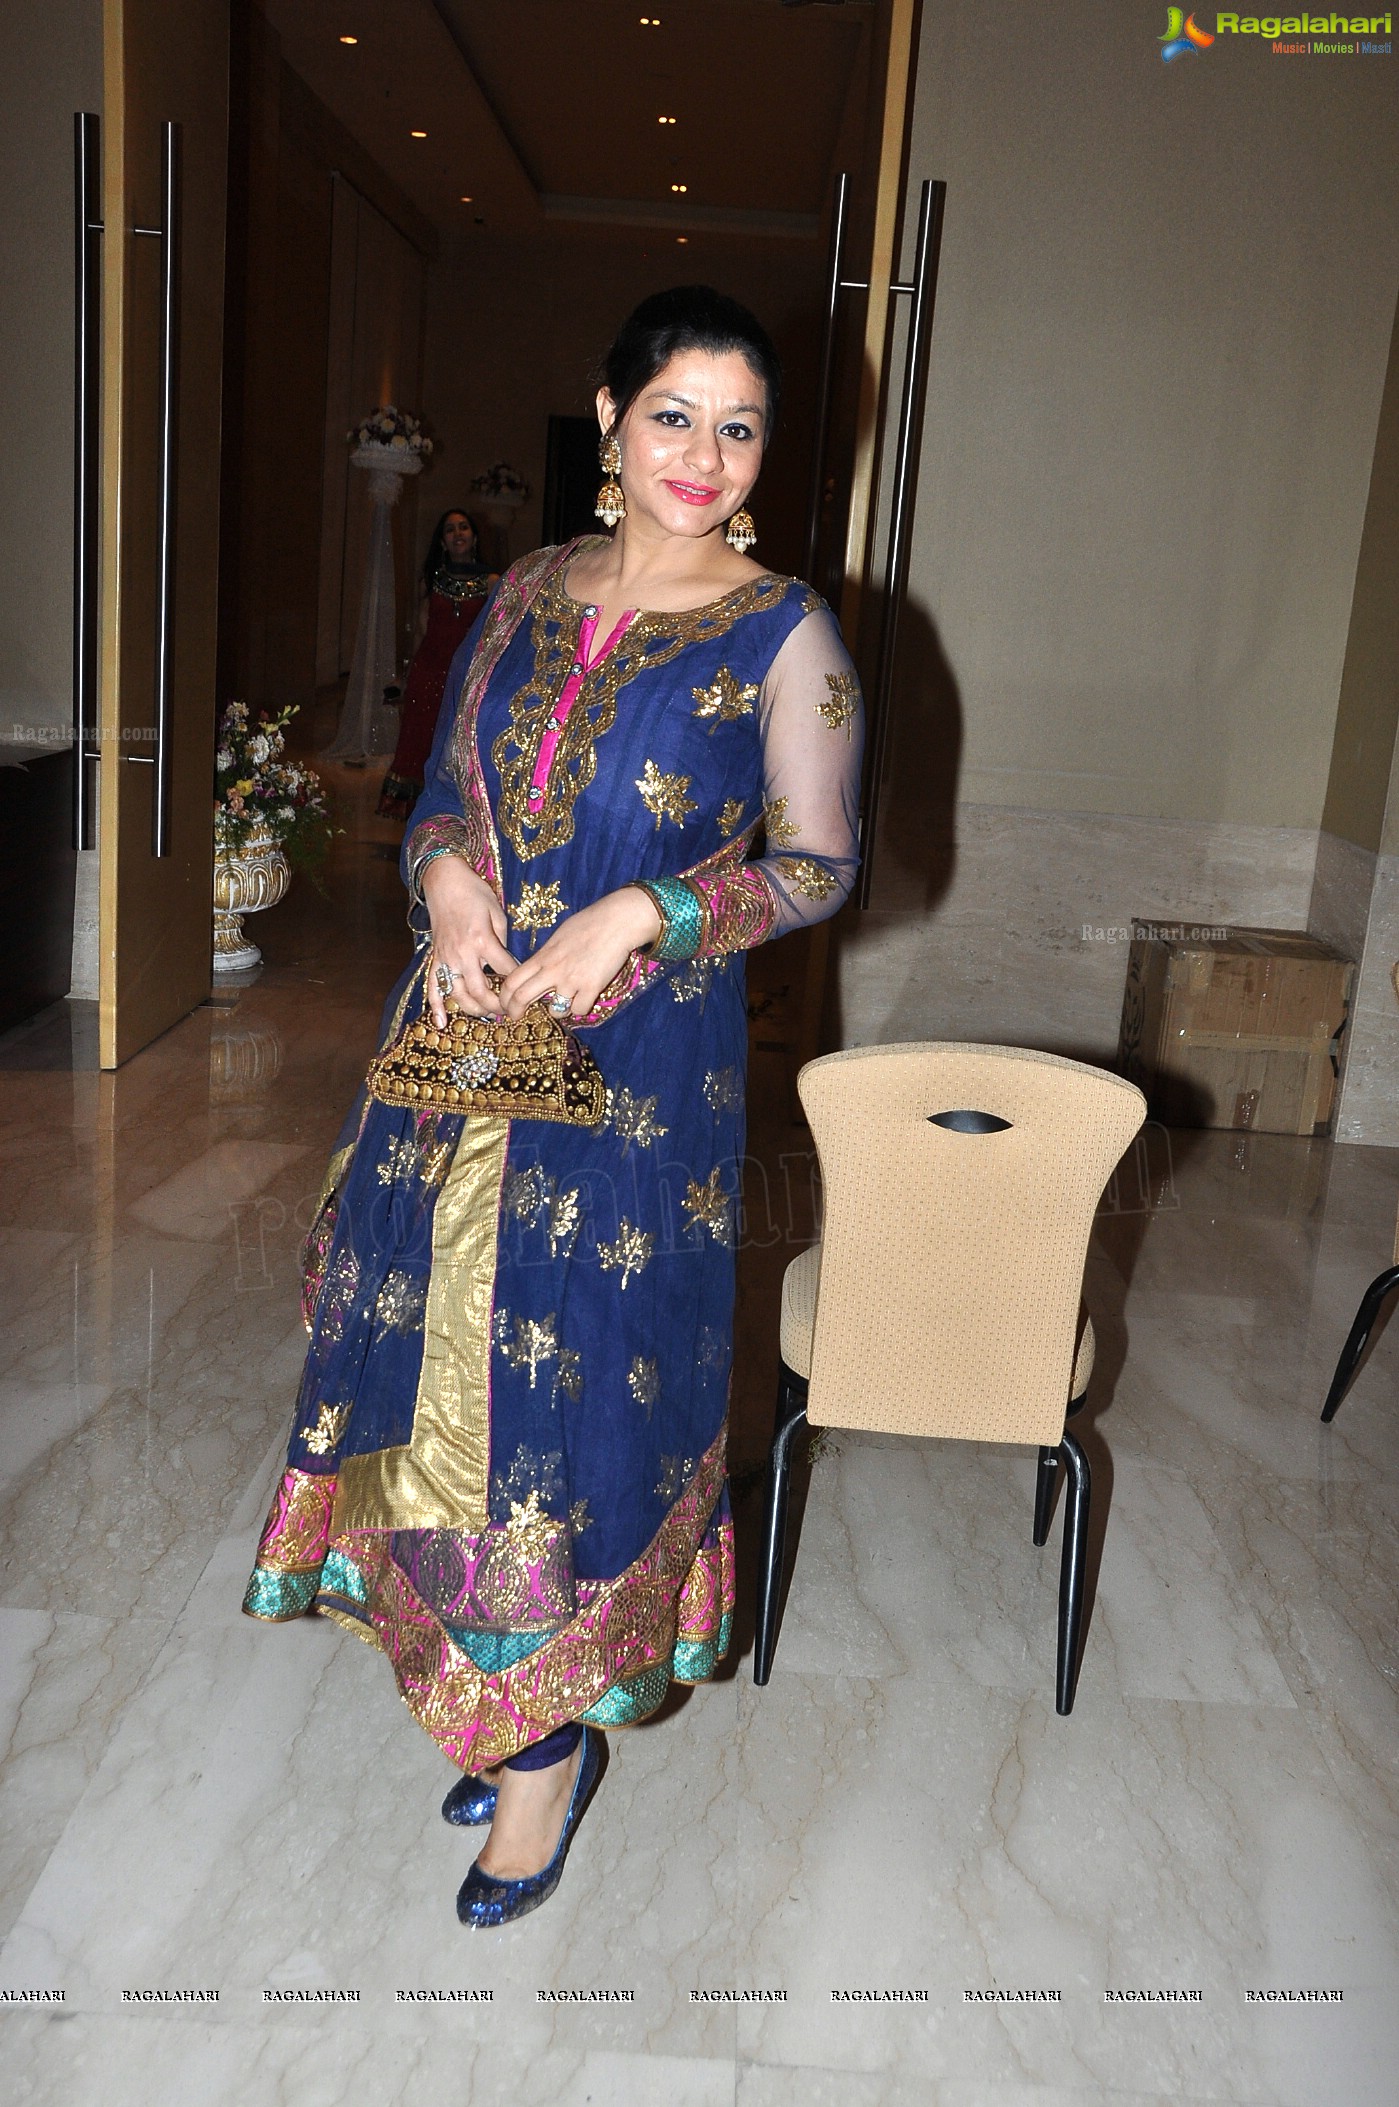 Hiral Doshi-Ronak S Gandhi's Engagement and Sangeet Party at Novotel, Hyderabad